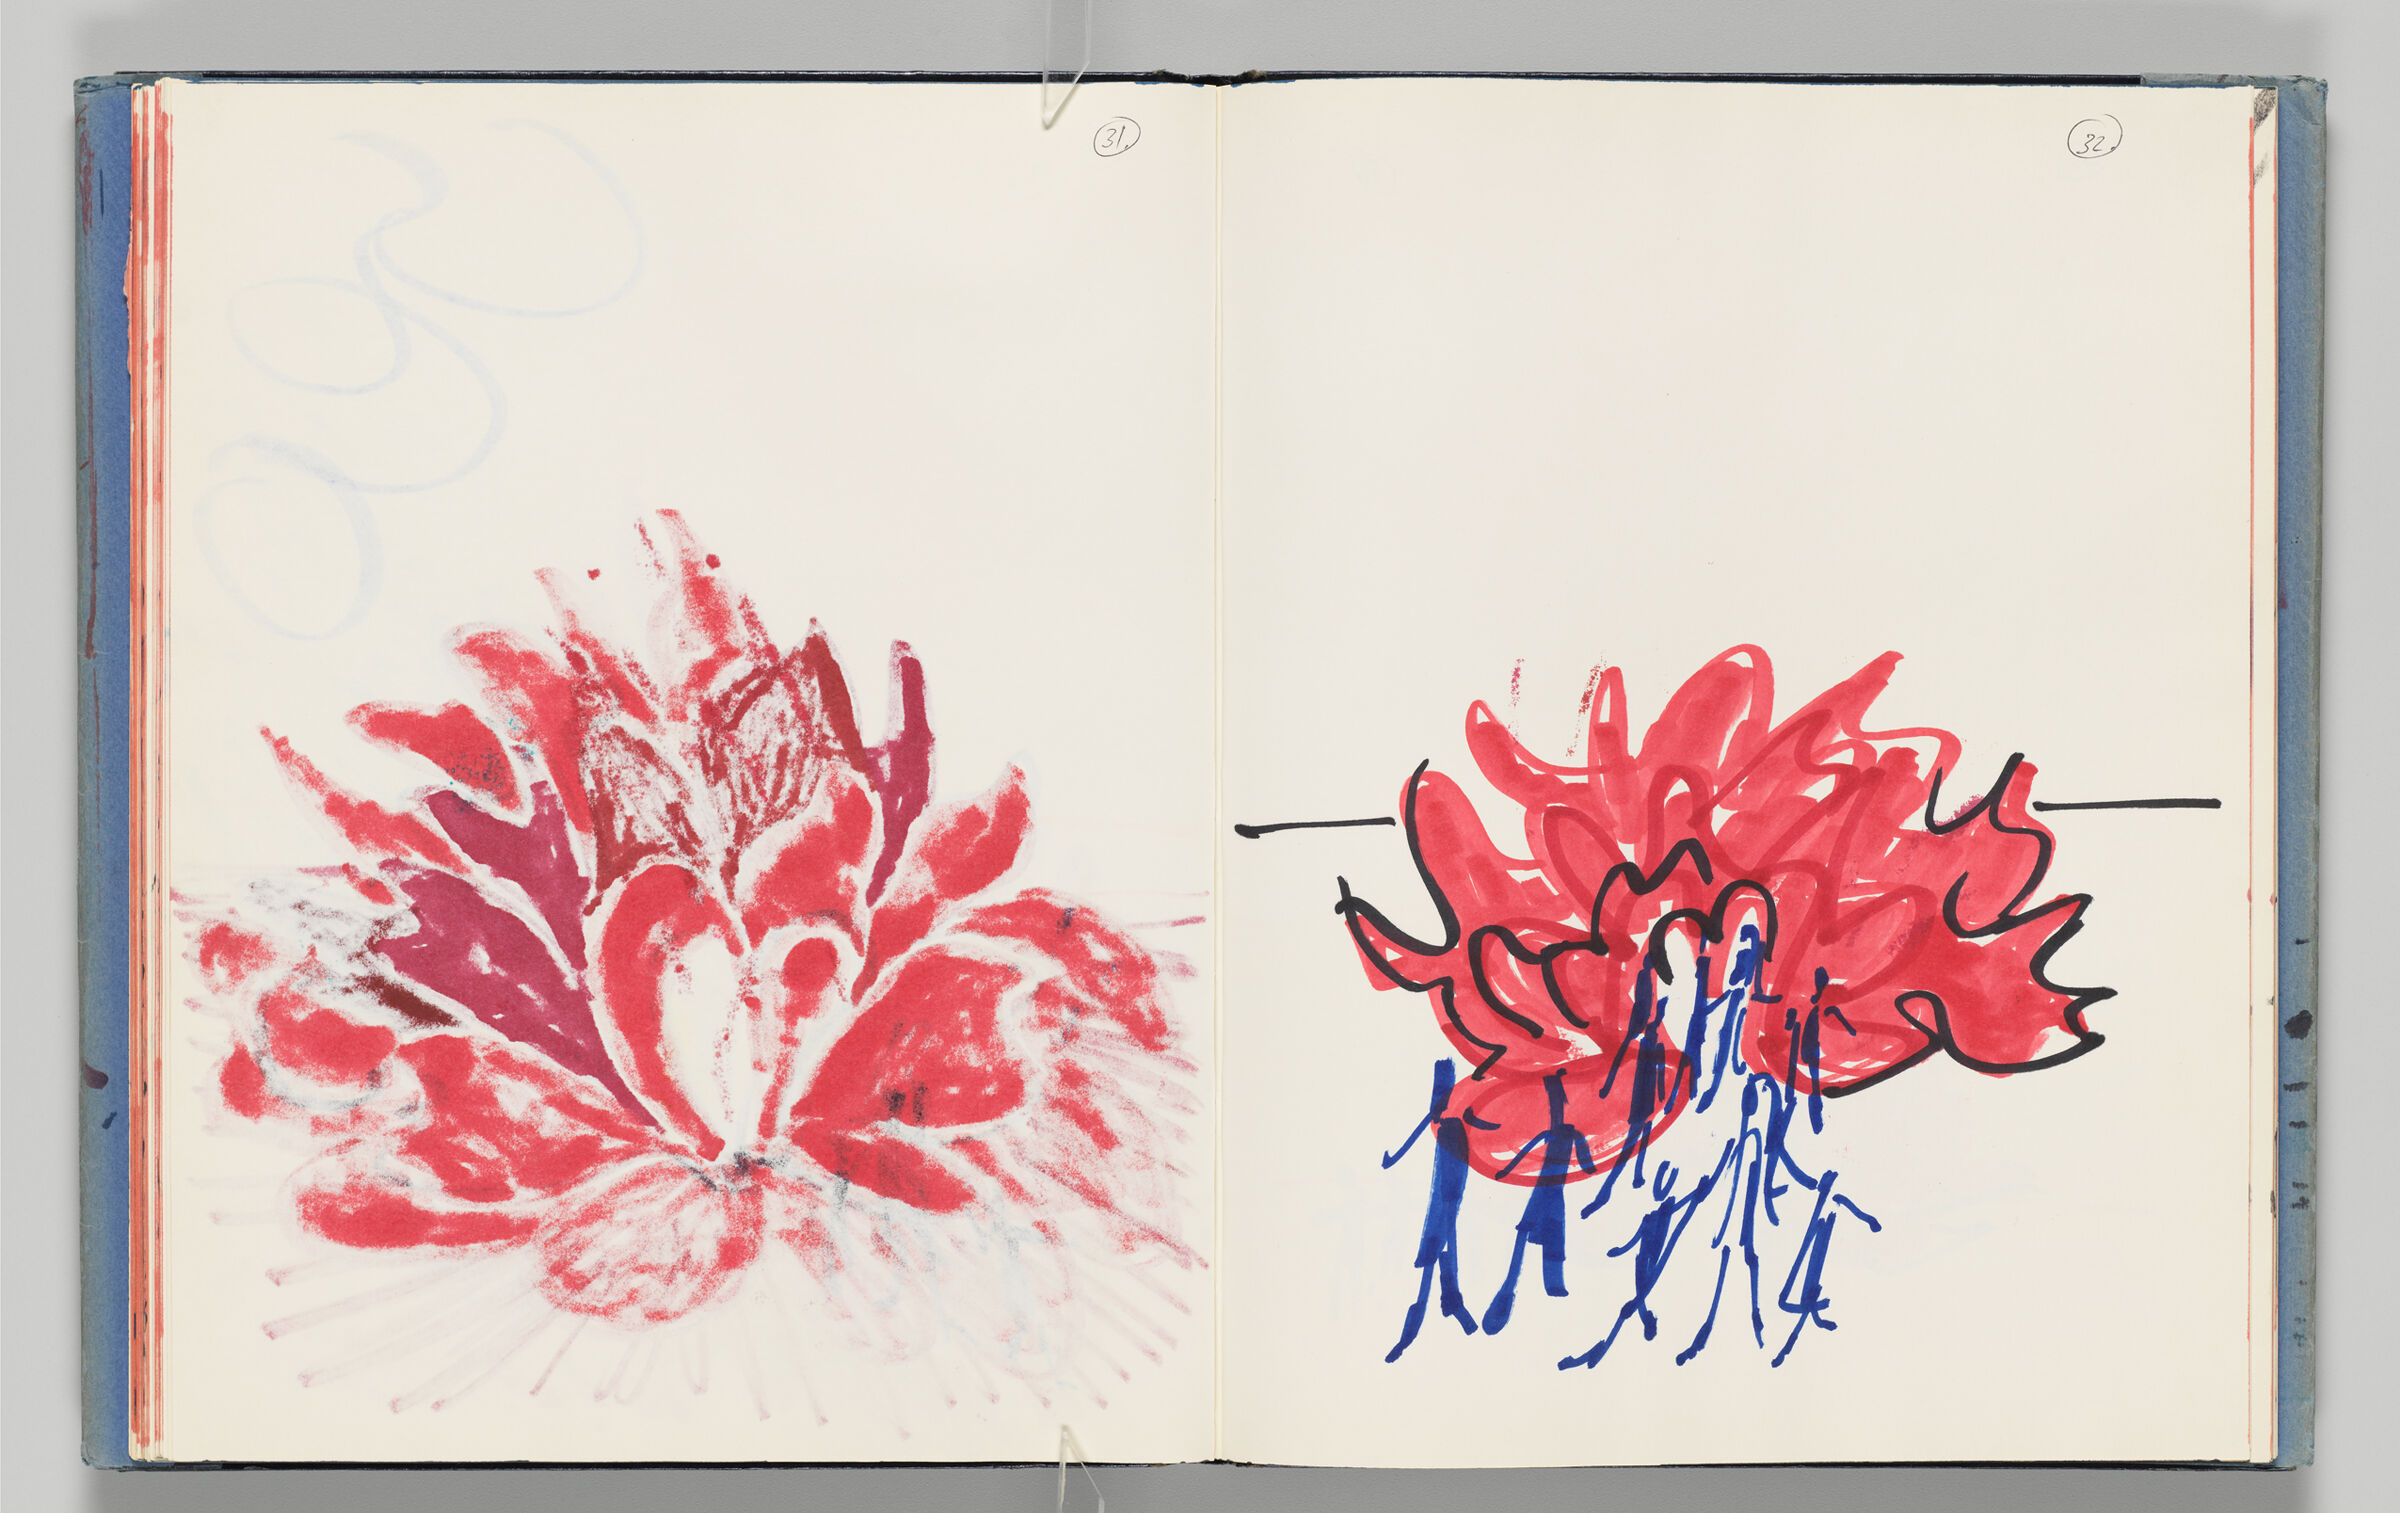 Untitled (Bleed-Through Of Previous Page With Page Number, Left Page); Untitled (Design For Flower House, Right Page)